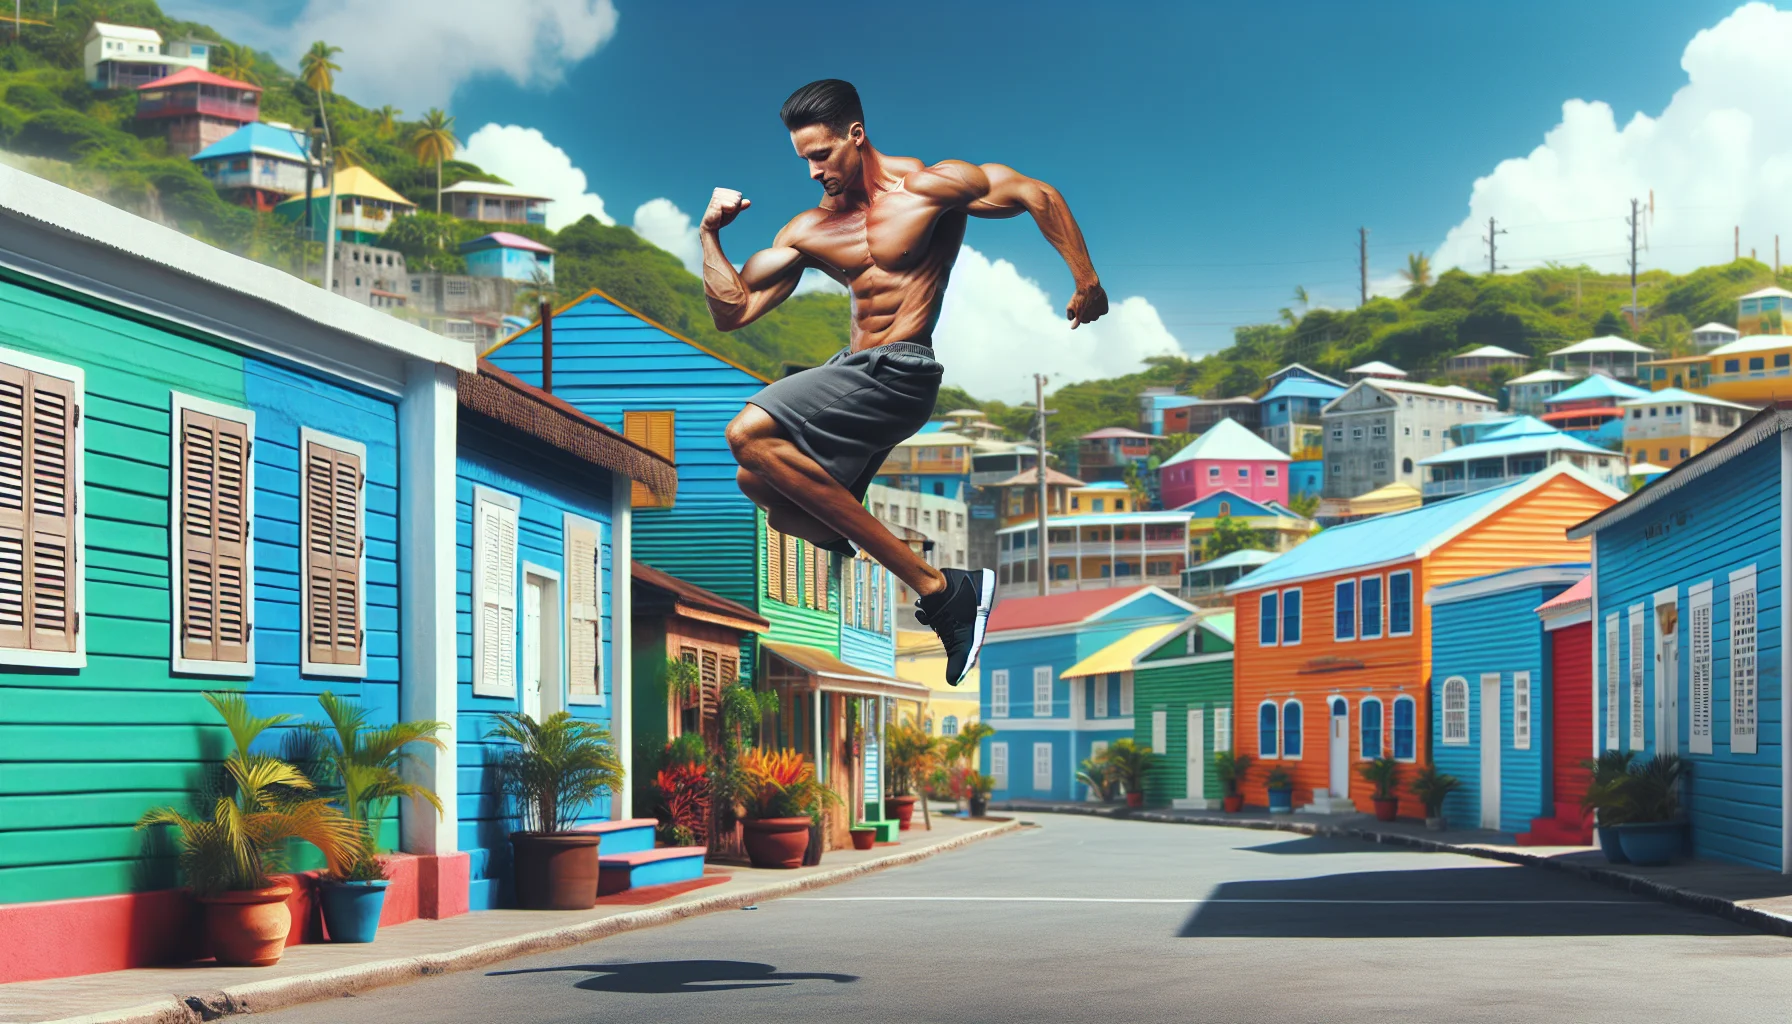 Create an amusing scene that showcases a male parkour enthusiast of Canadian descent, performing athletic stunts and jumps in a distinctively Bajan (Barbadian) environment. The man's physique should be athletic and he should exhibit evident joy and excitement as he navigates the urban setting. The backdrop should include elements of Barbadian culture and lifestyle, like unique architectural styles, colorful houses, and tropical flora. Let the scene subtly encourage viewers towards physical activity and exercise.